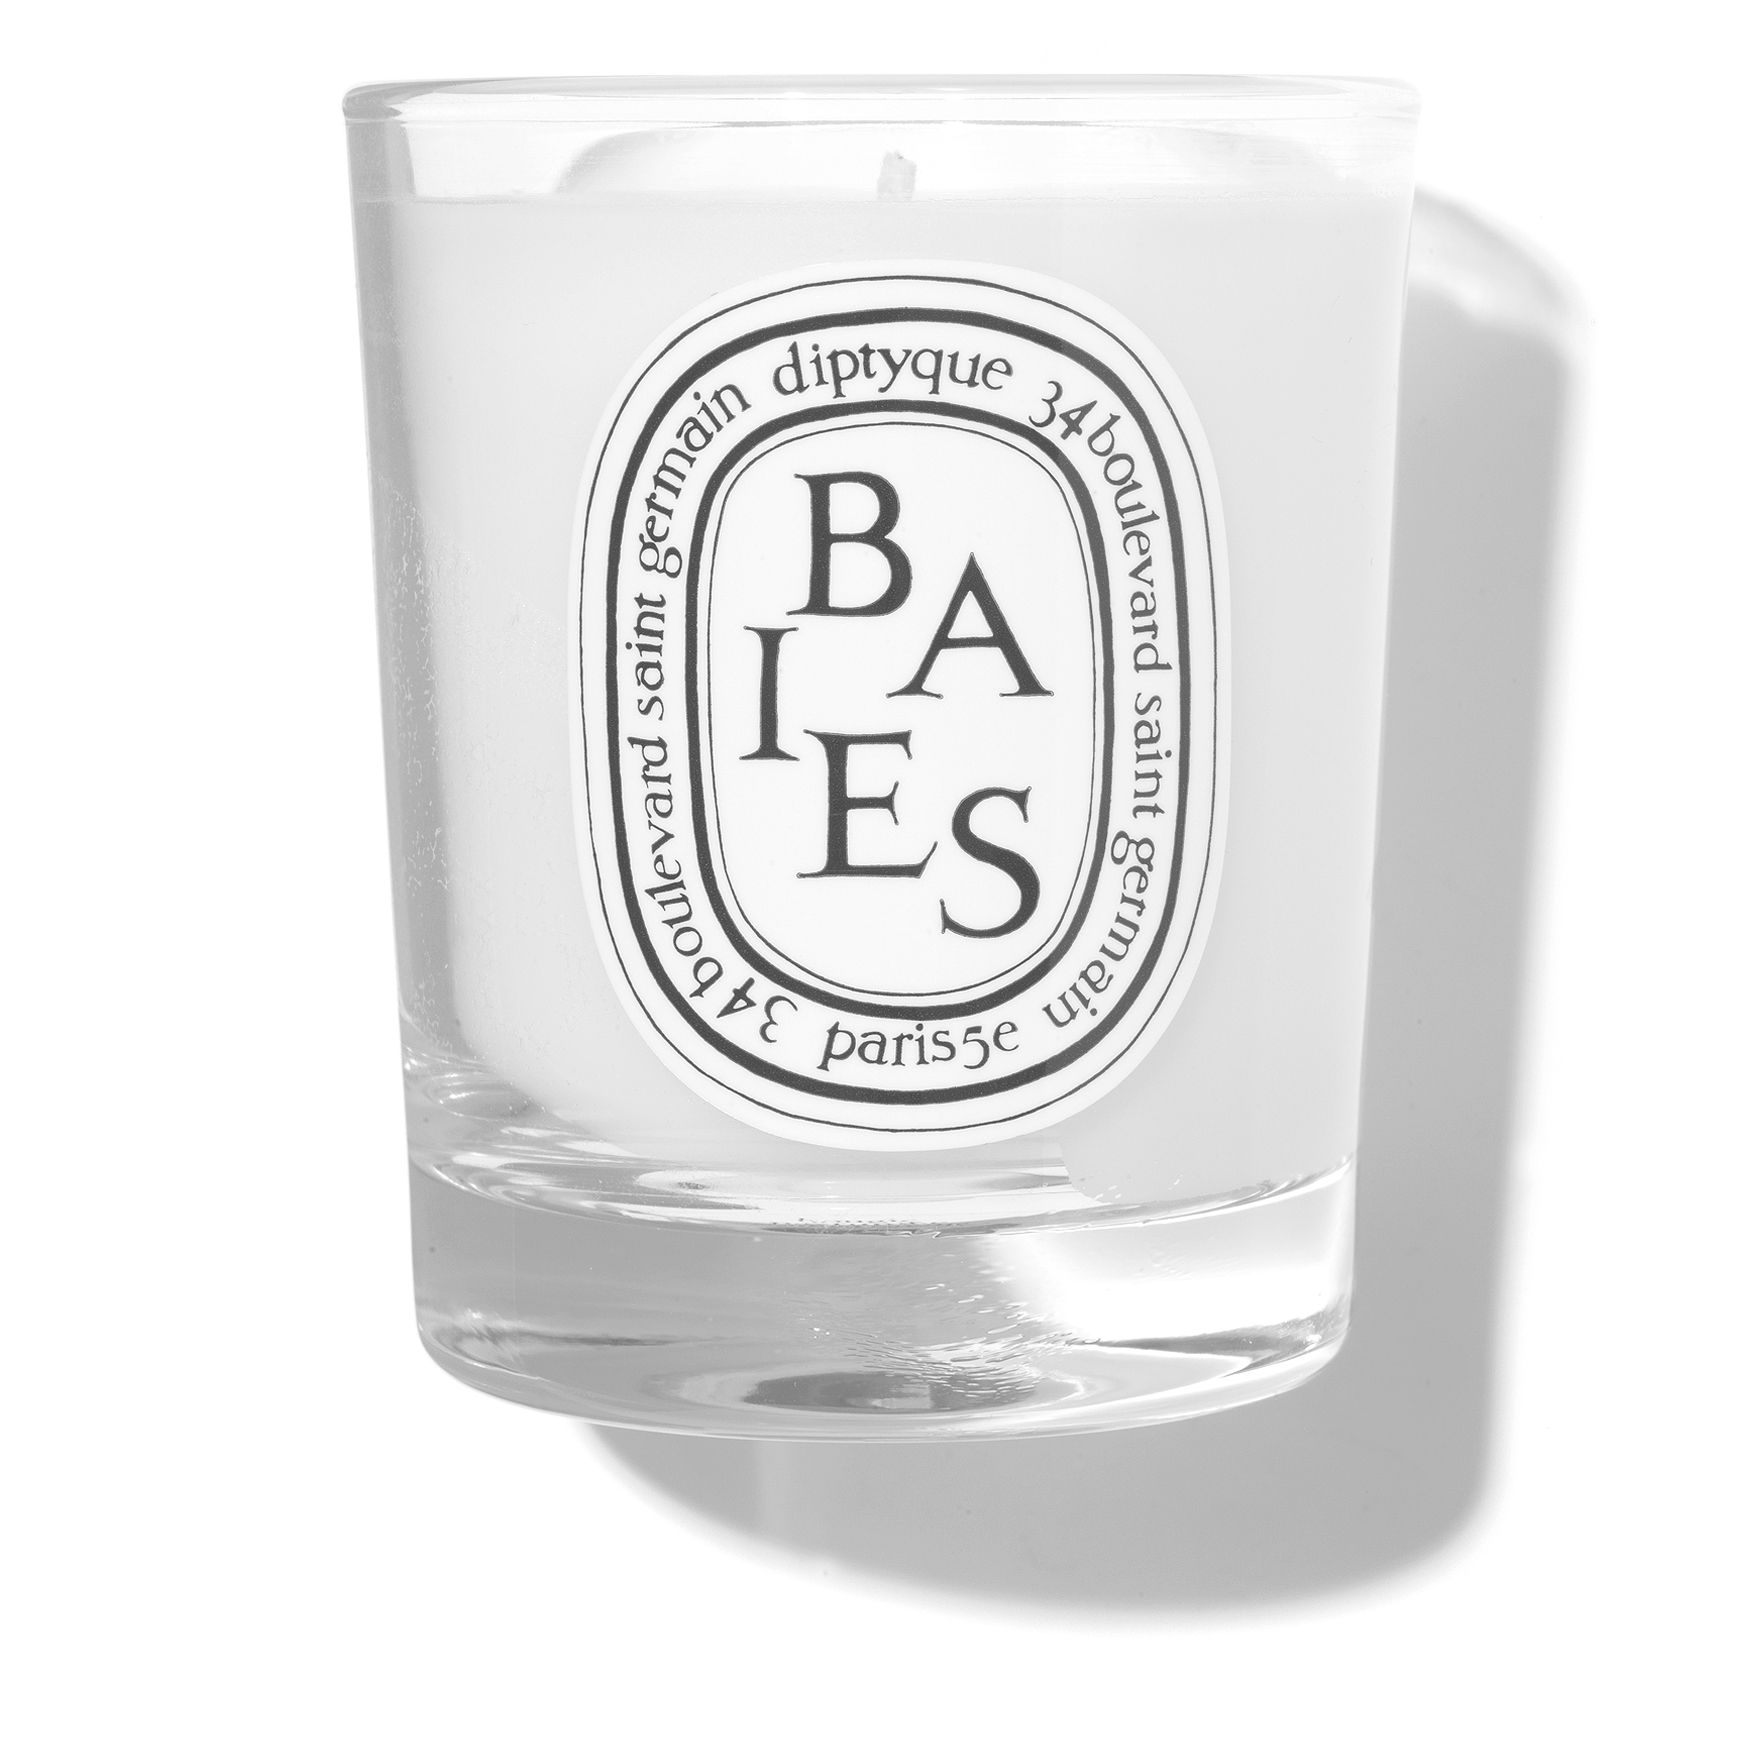 Baies Scented Candle - Diptyque | Space NK | Space NK (EU)